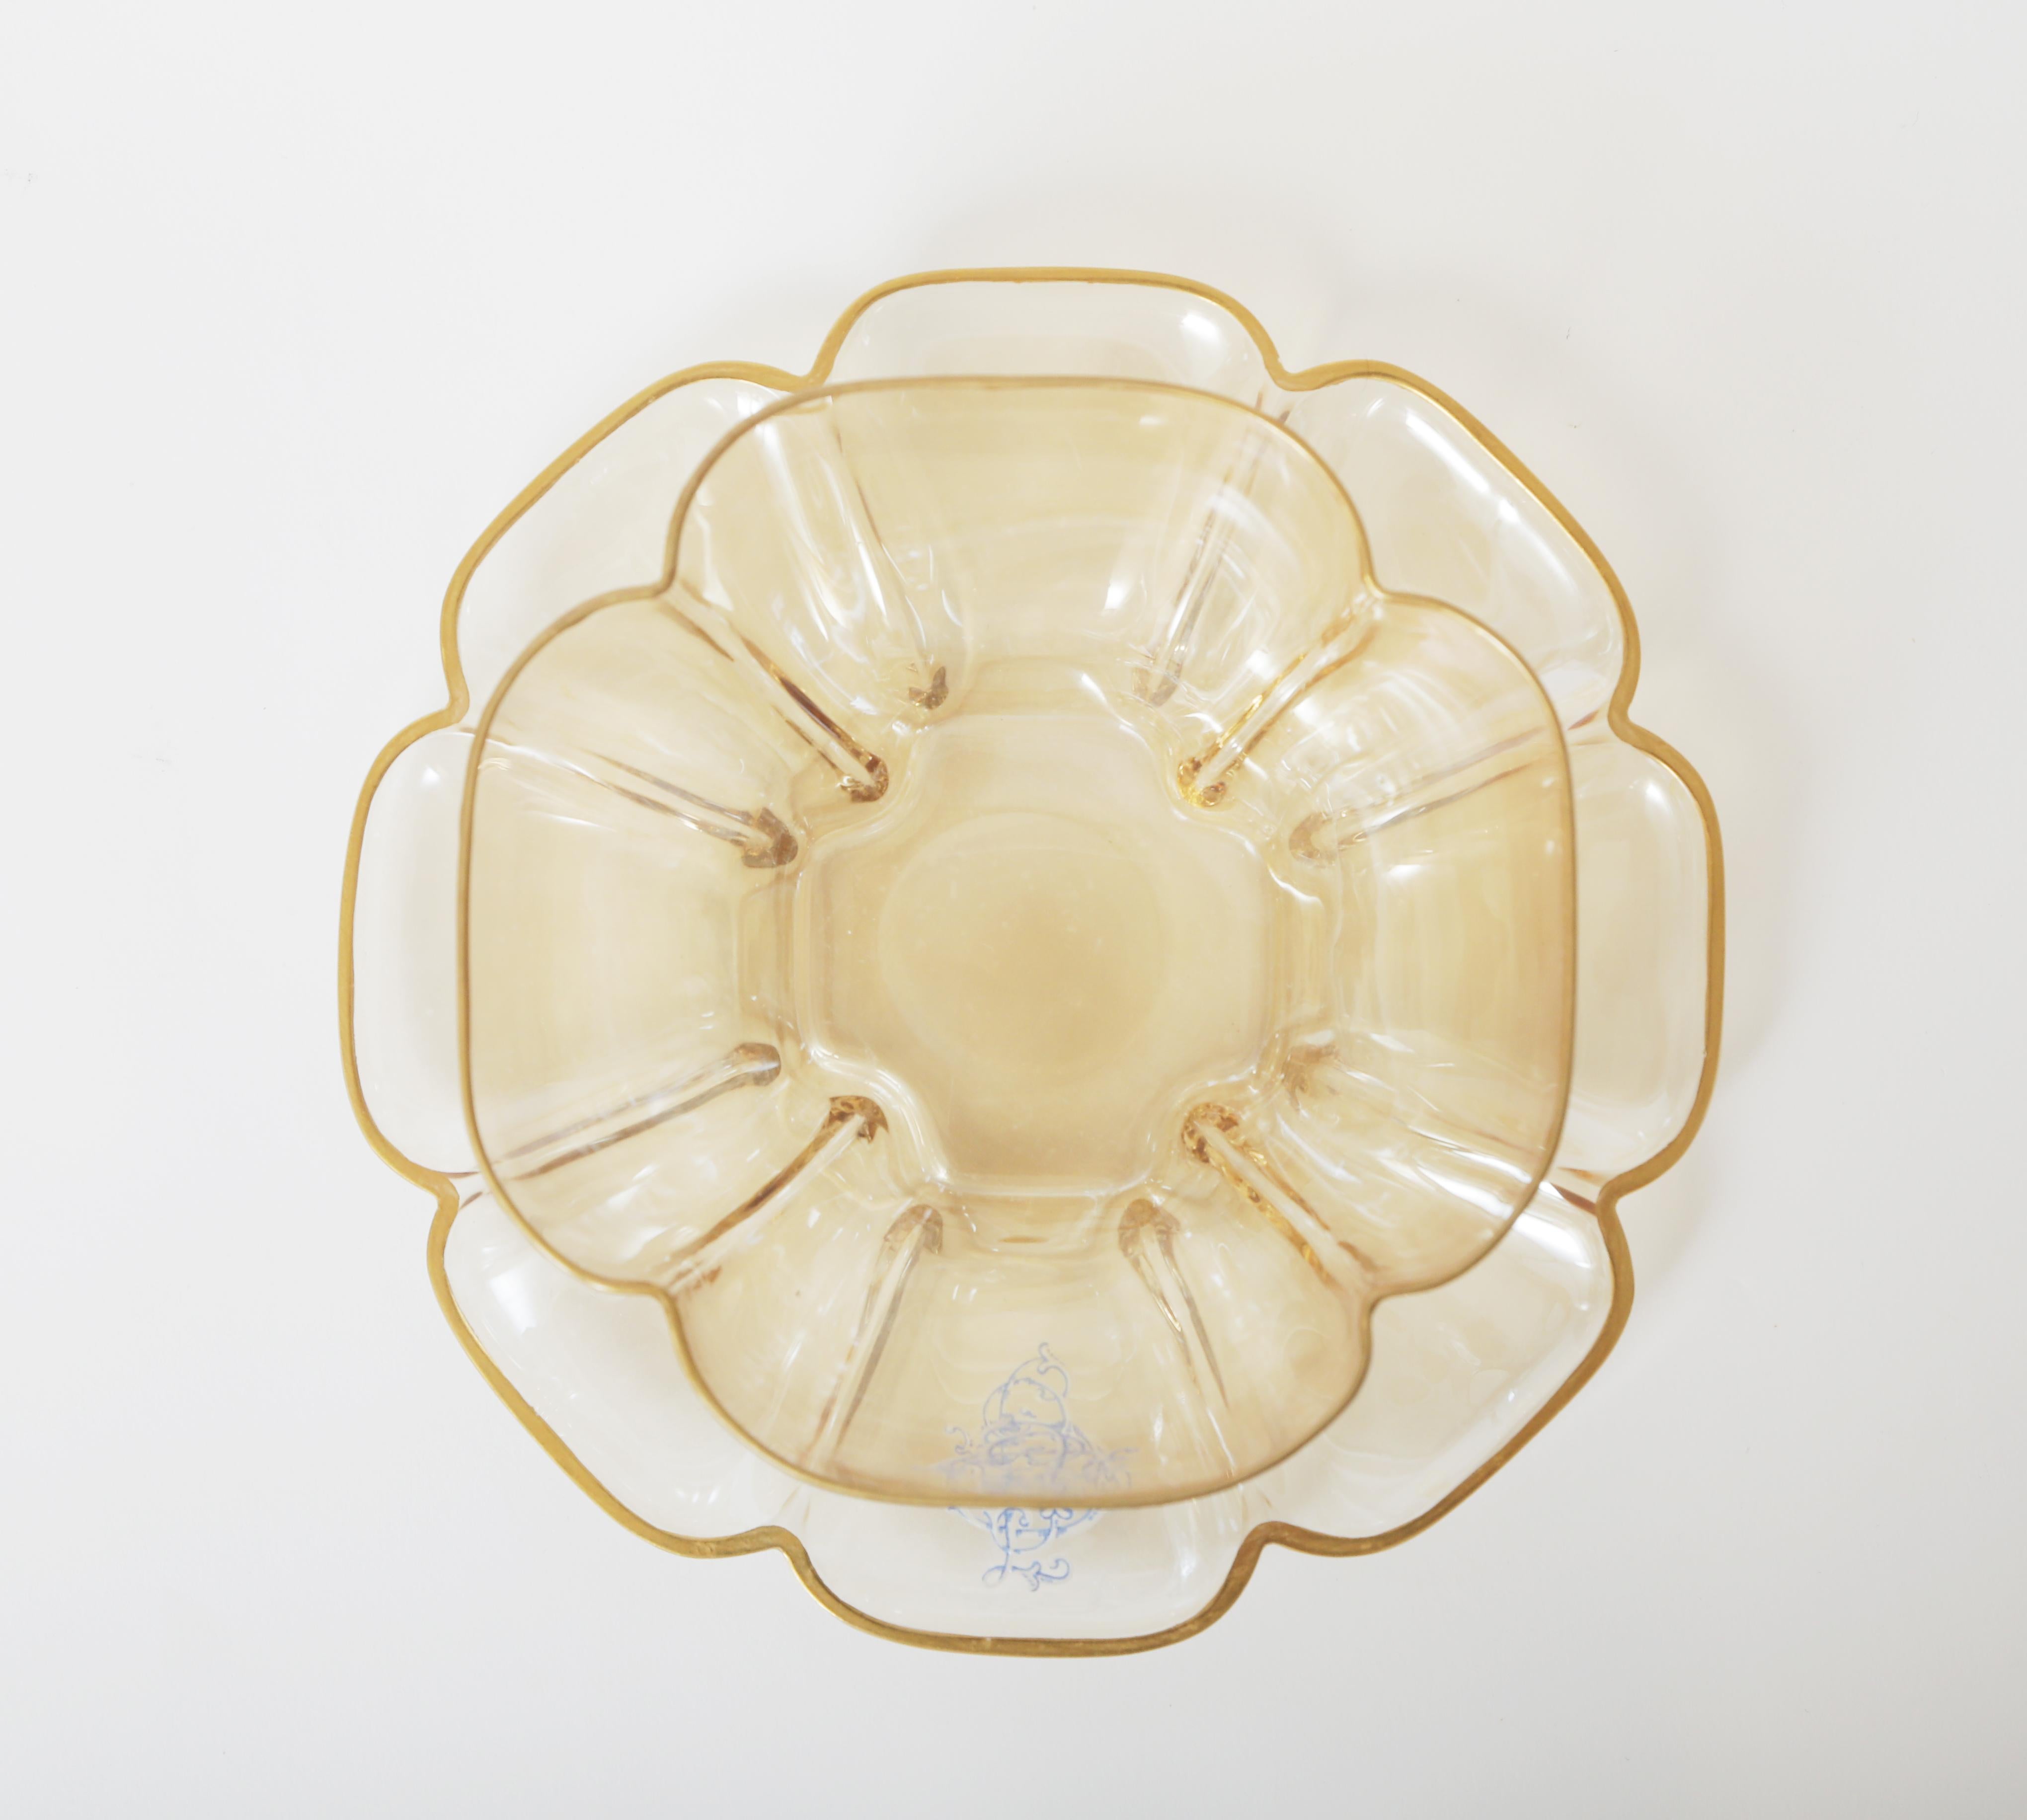 Hand-Painted 12 Antique Crystal Dessert Bowls with 12 Plates, 19th Century Moser, 24 Pieces